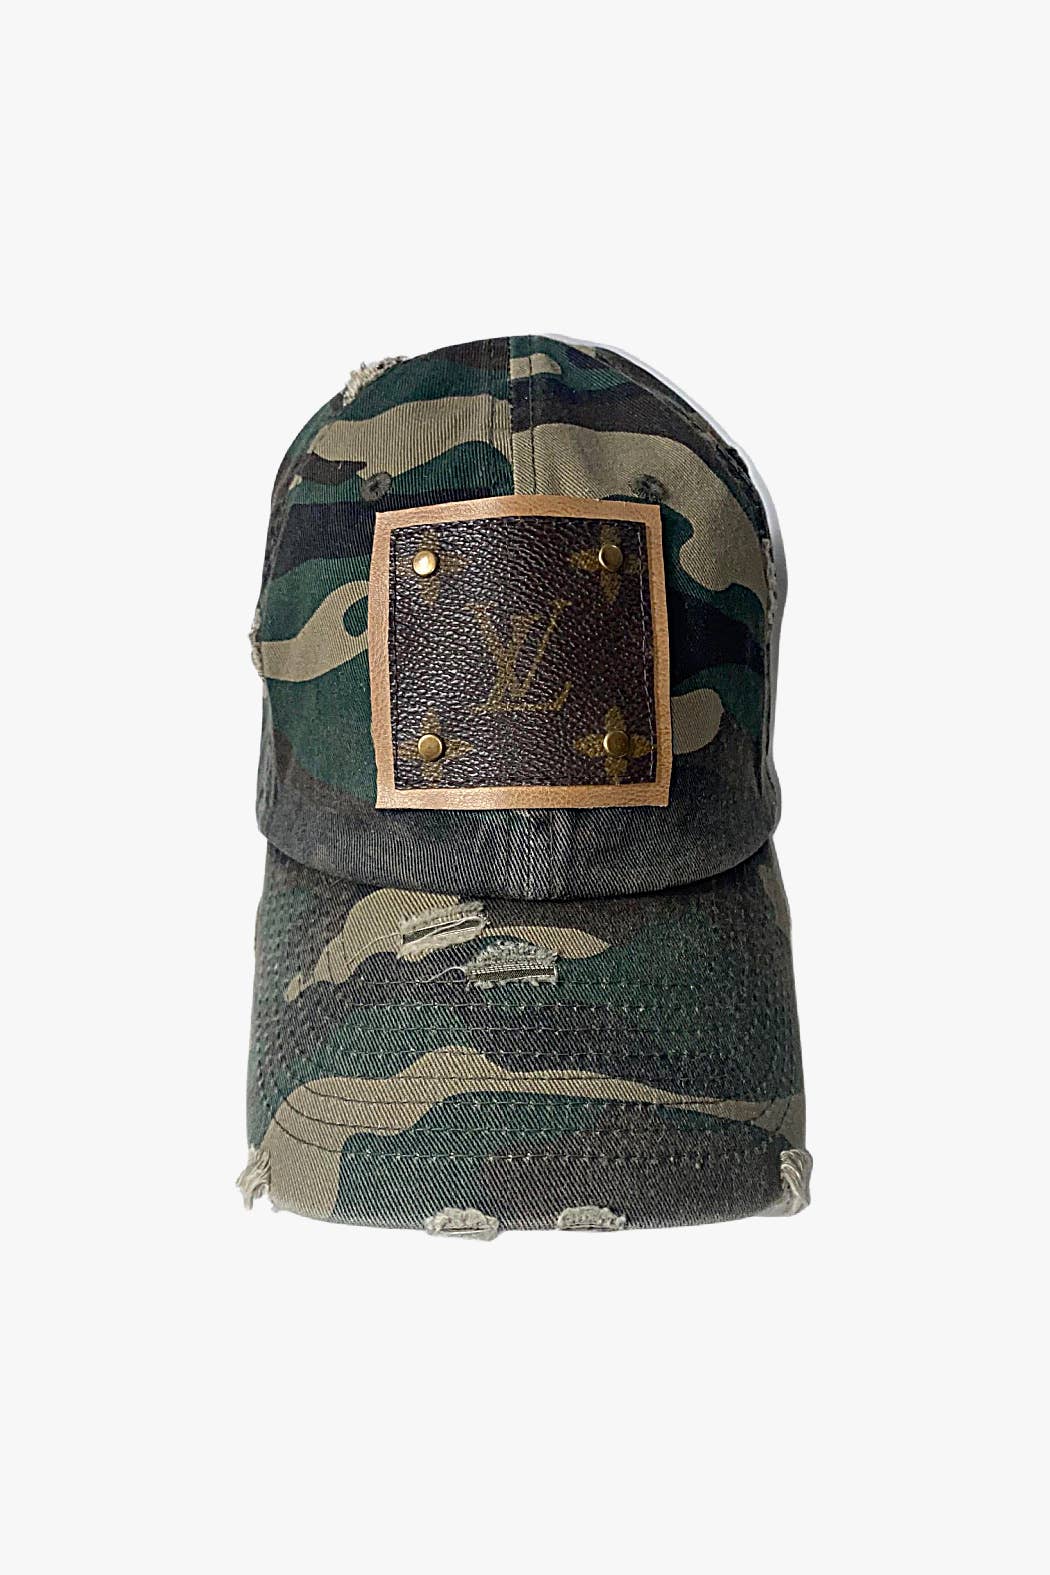 Up-Cycled Green Camo Cap w Authentic Louis Vuitton Materials